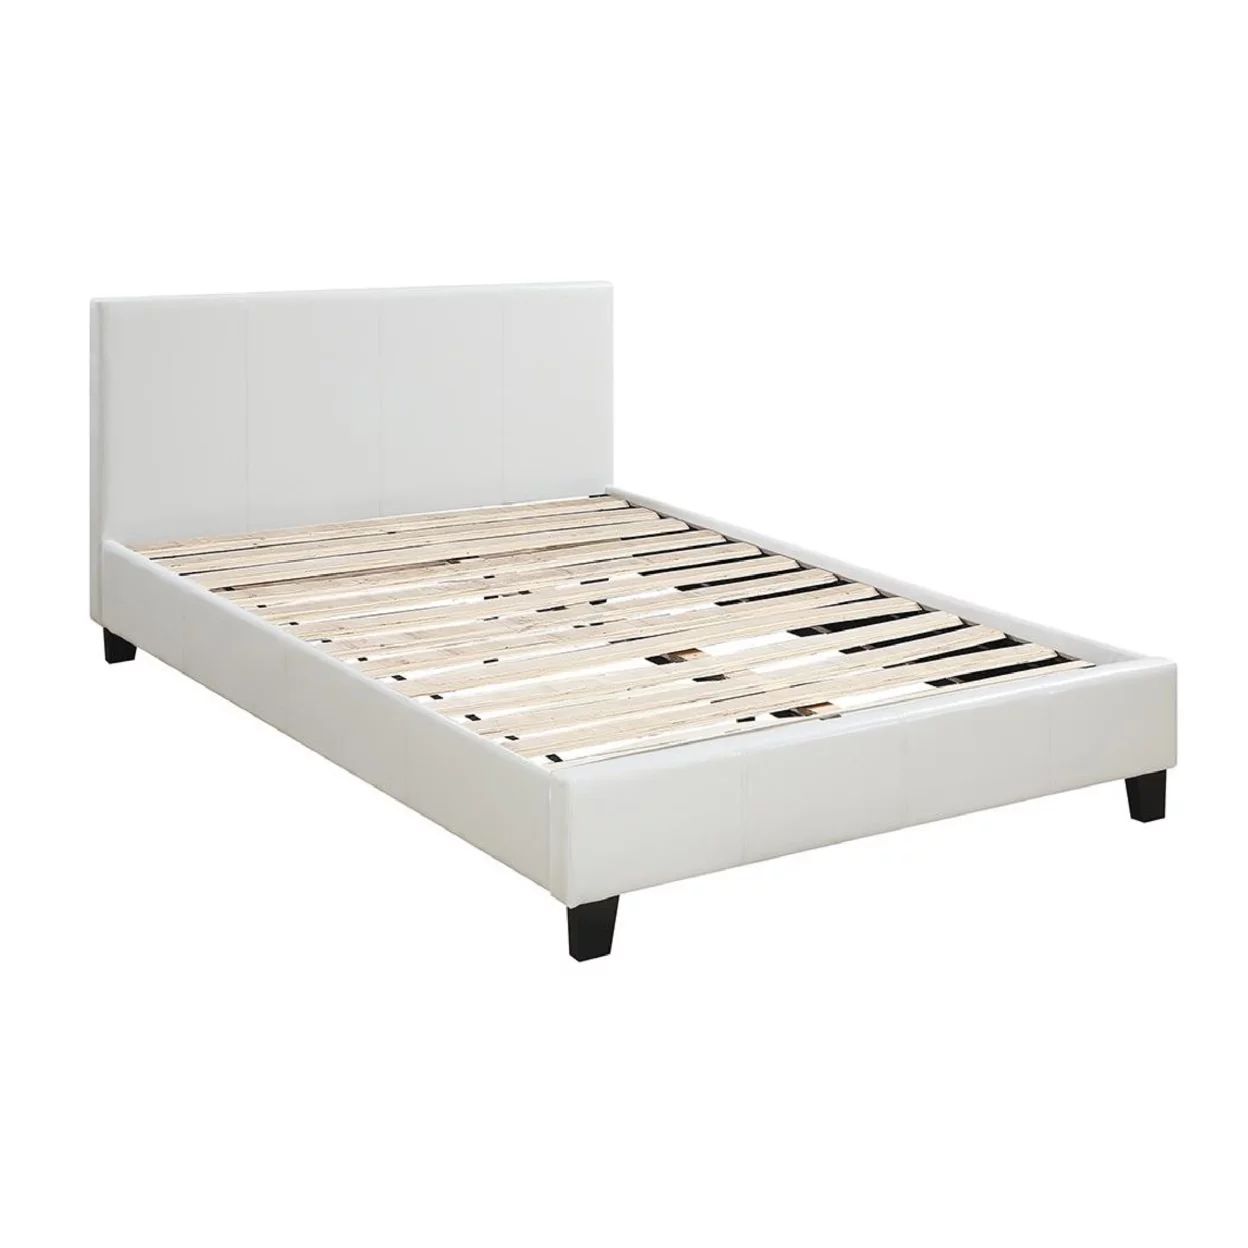 Transitional Style Leatherette Queen Bed with Padded Headboard, White- Saltoro Sherpi | Walmart (US)